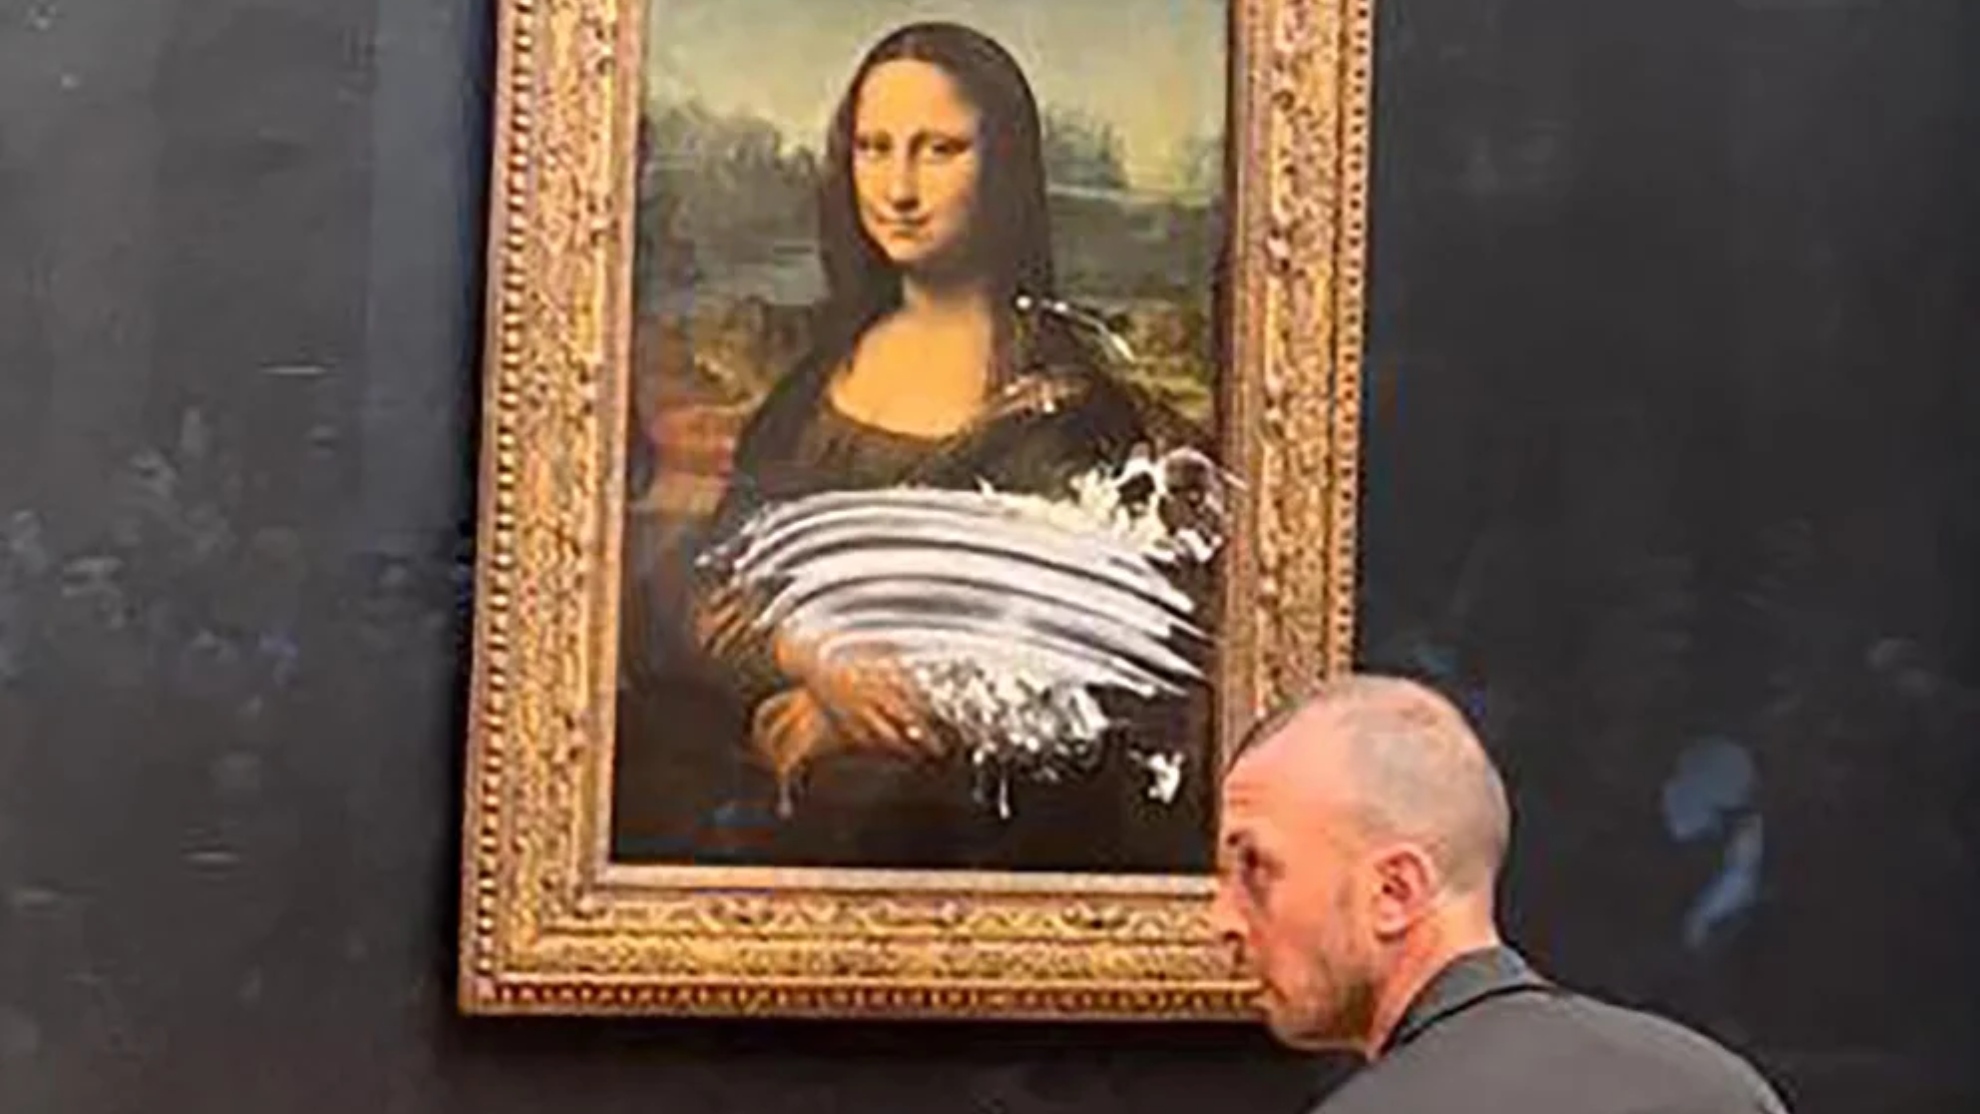 Mona Lisa gets caked by man disguised as old woman at the Louvre | Marca